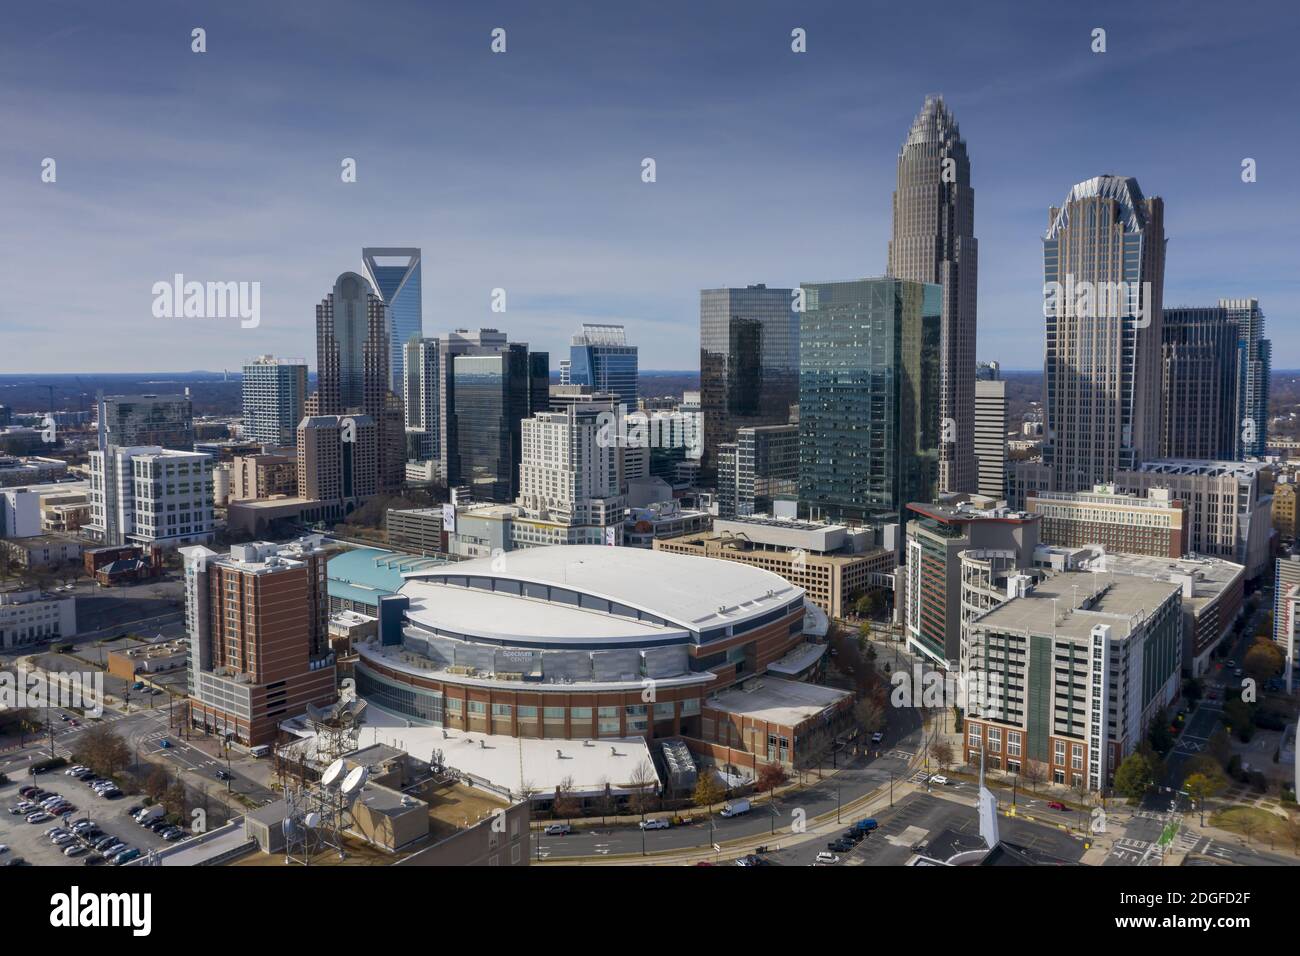 Aerial Views Of The City Of The 2020 Republican National Convention Spectrum Center Charlotte NC Stock Photo